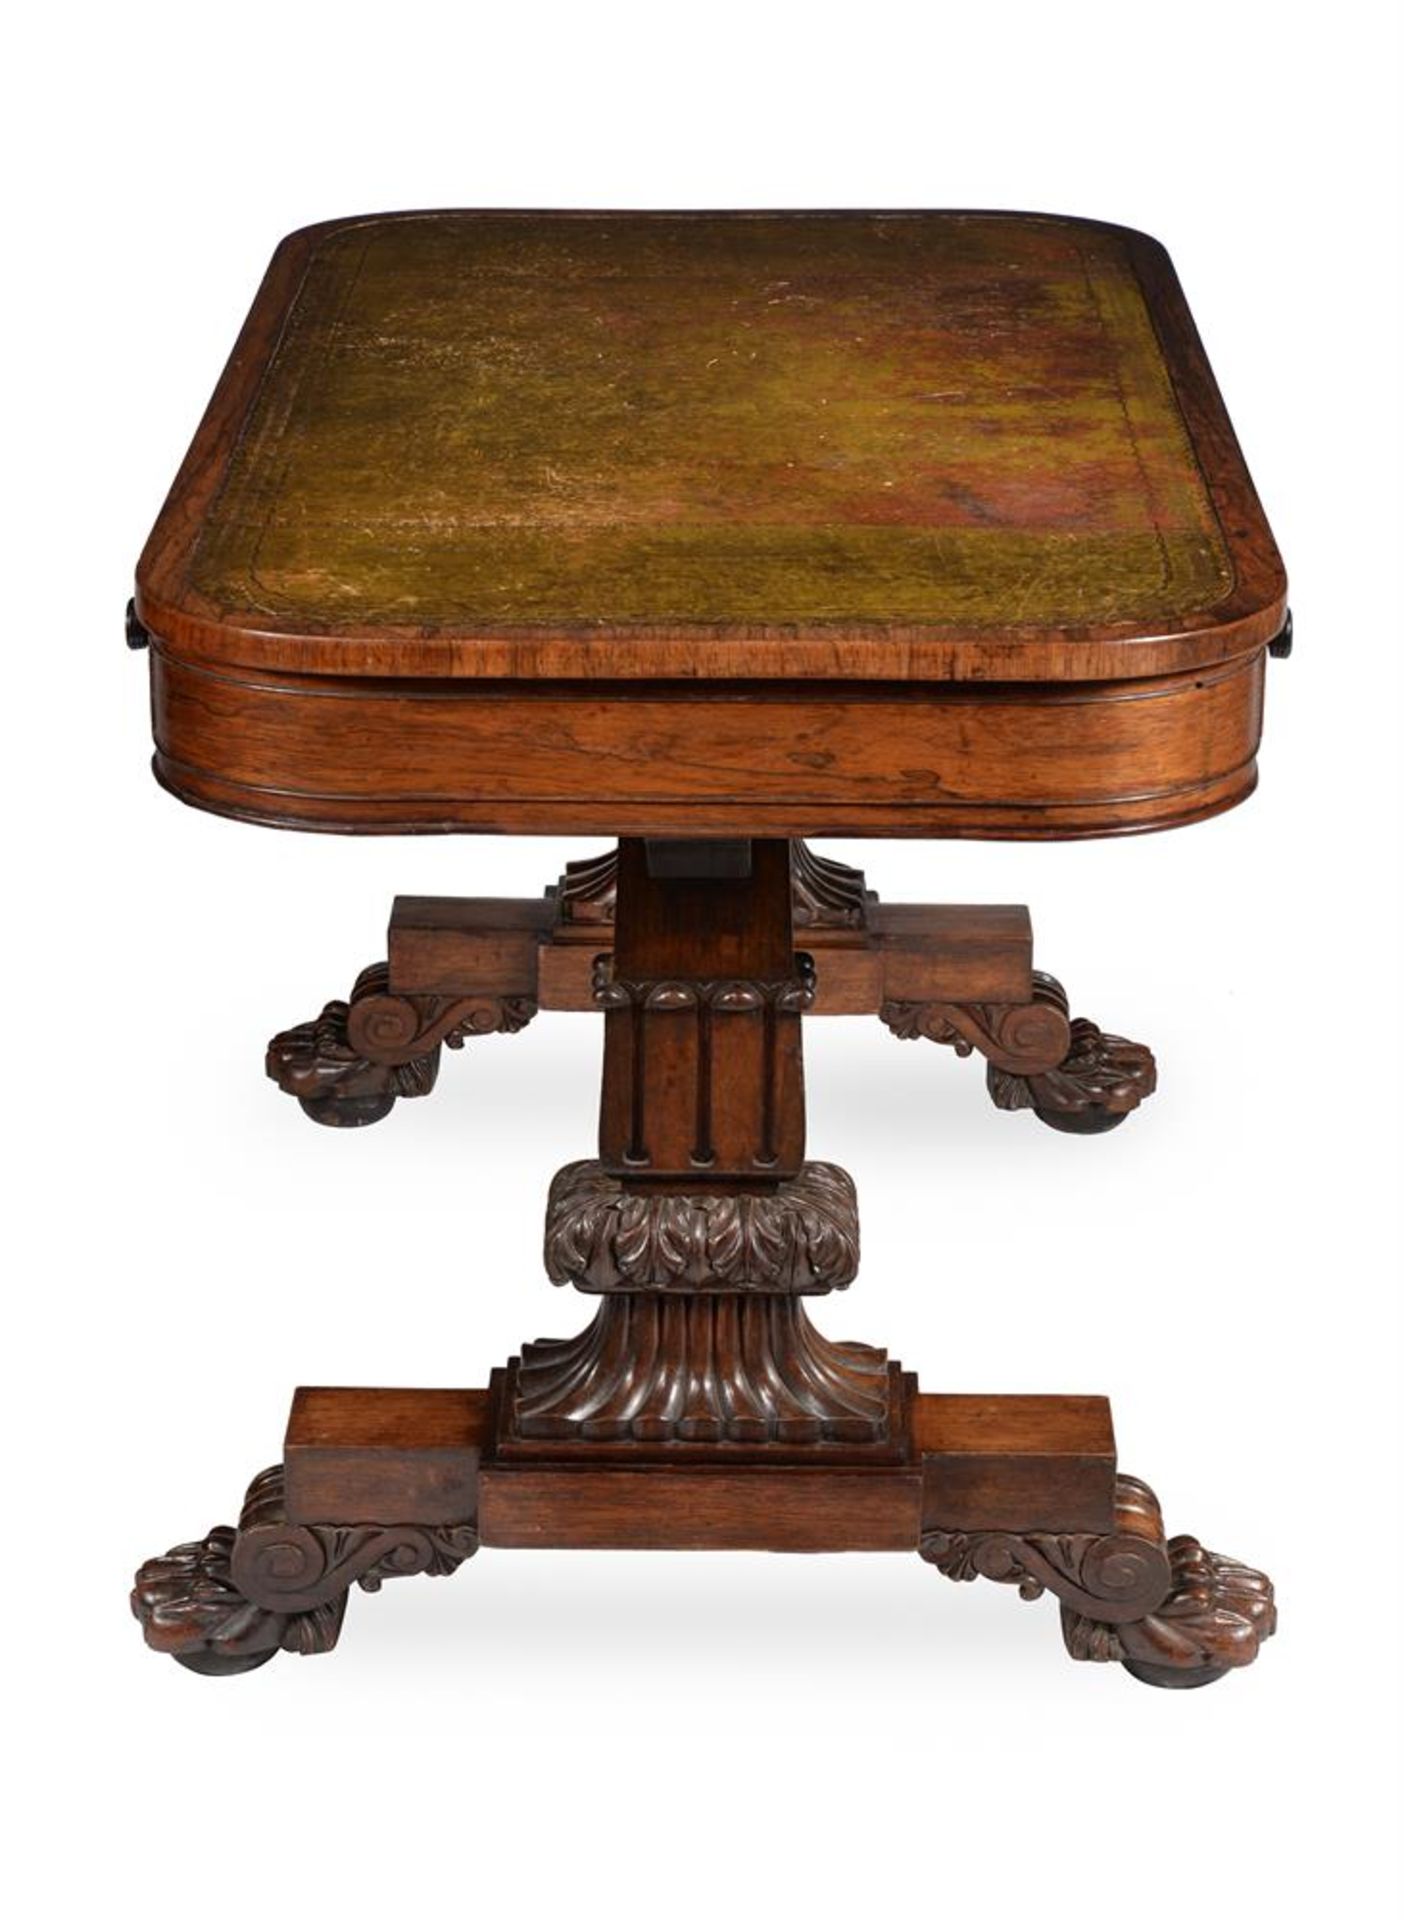 Y A GEORGE IV ROSEWOOD LIBRARY TABLE, IN THE MANNER OF MACK, WILLIAM & GIBTON, CIRCA 1825 - Image 5 of 6